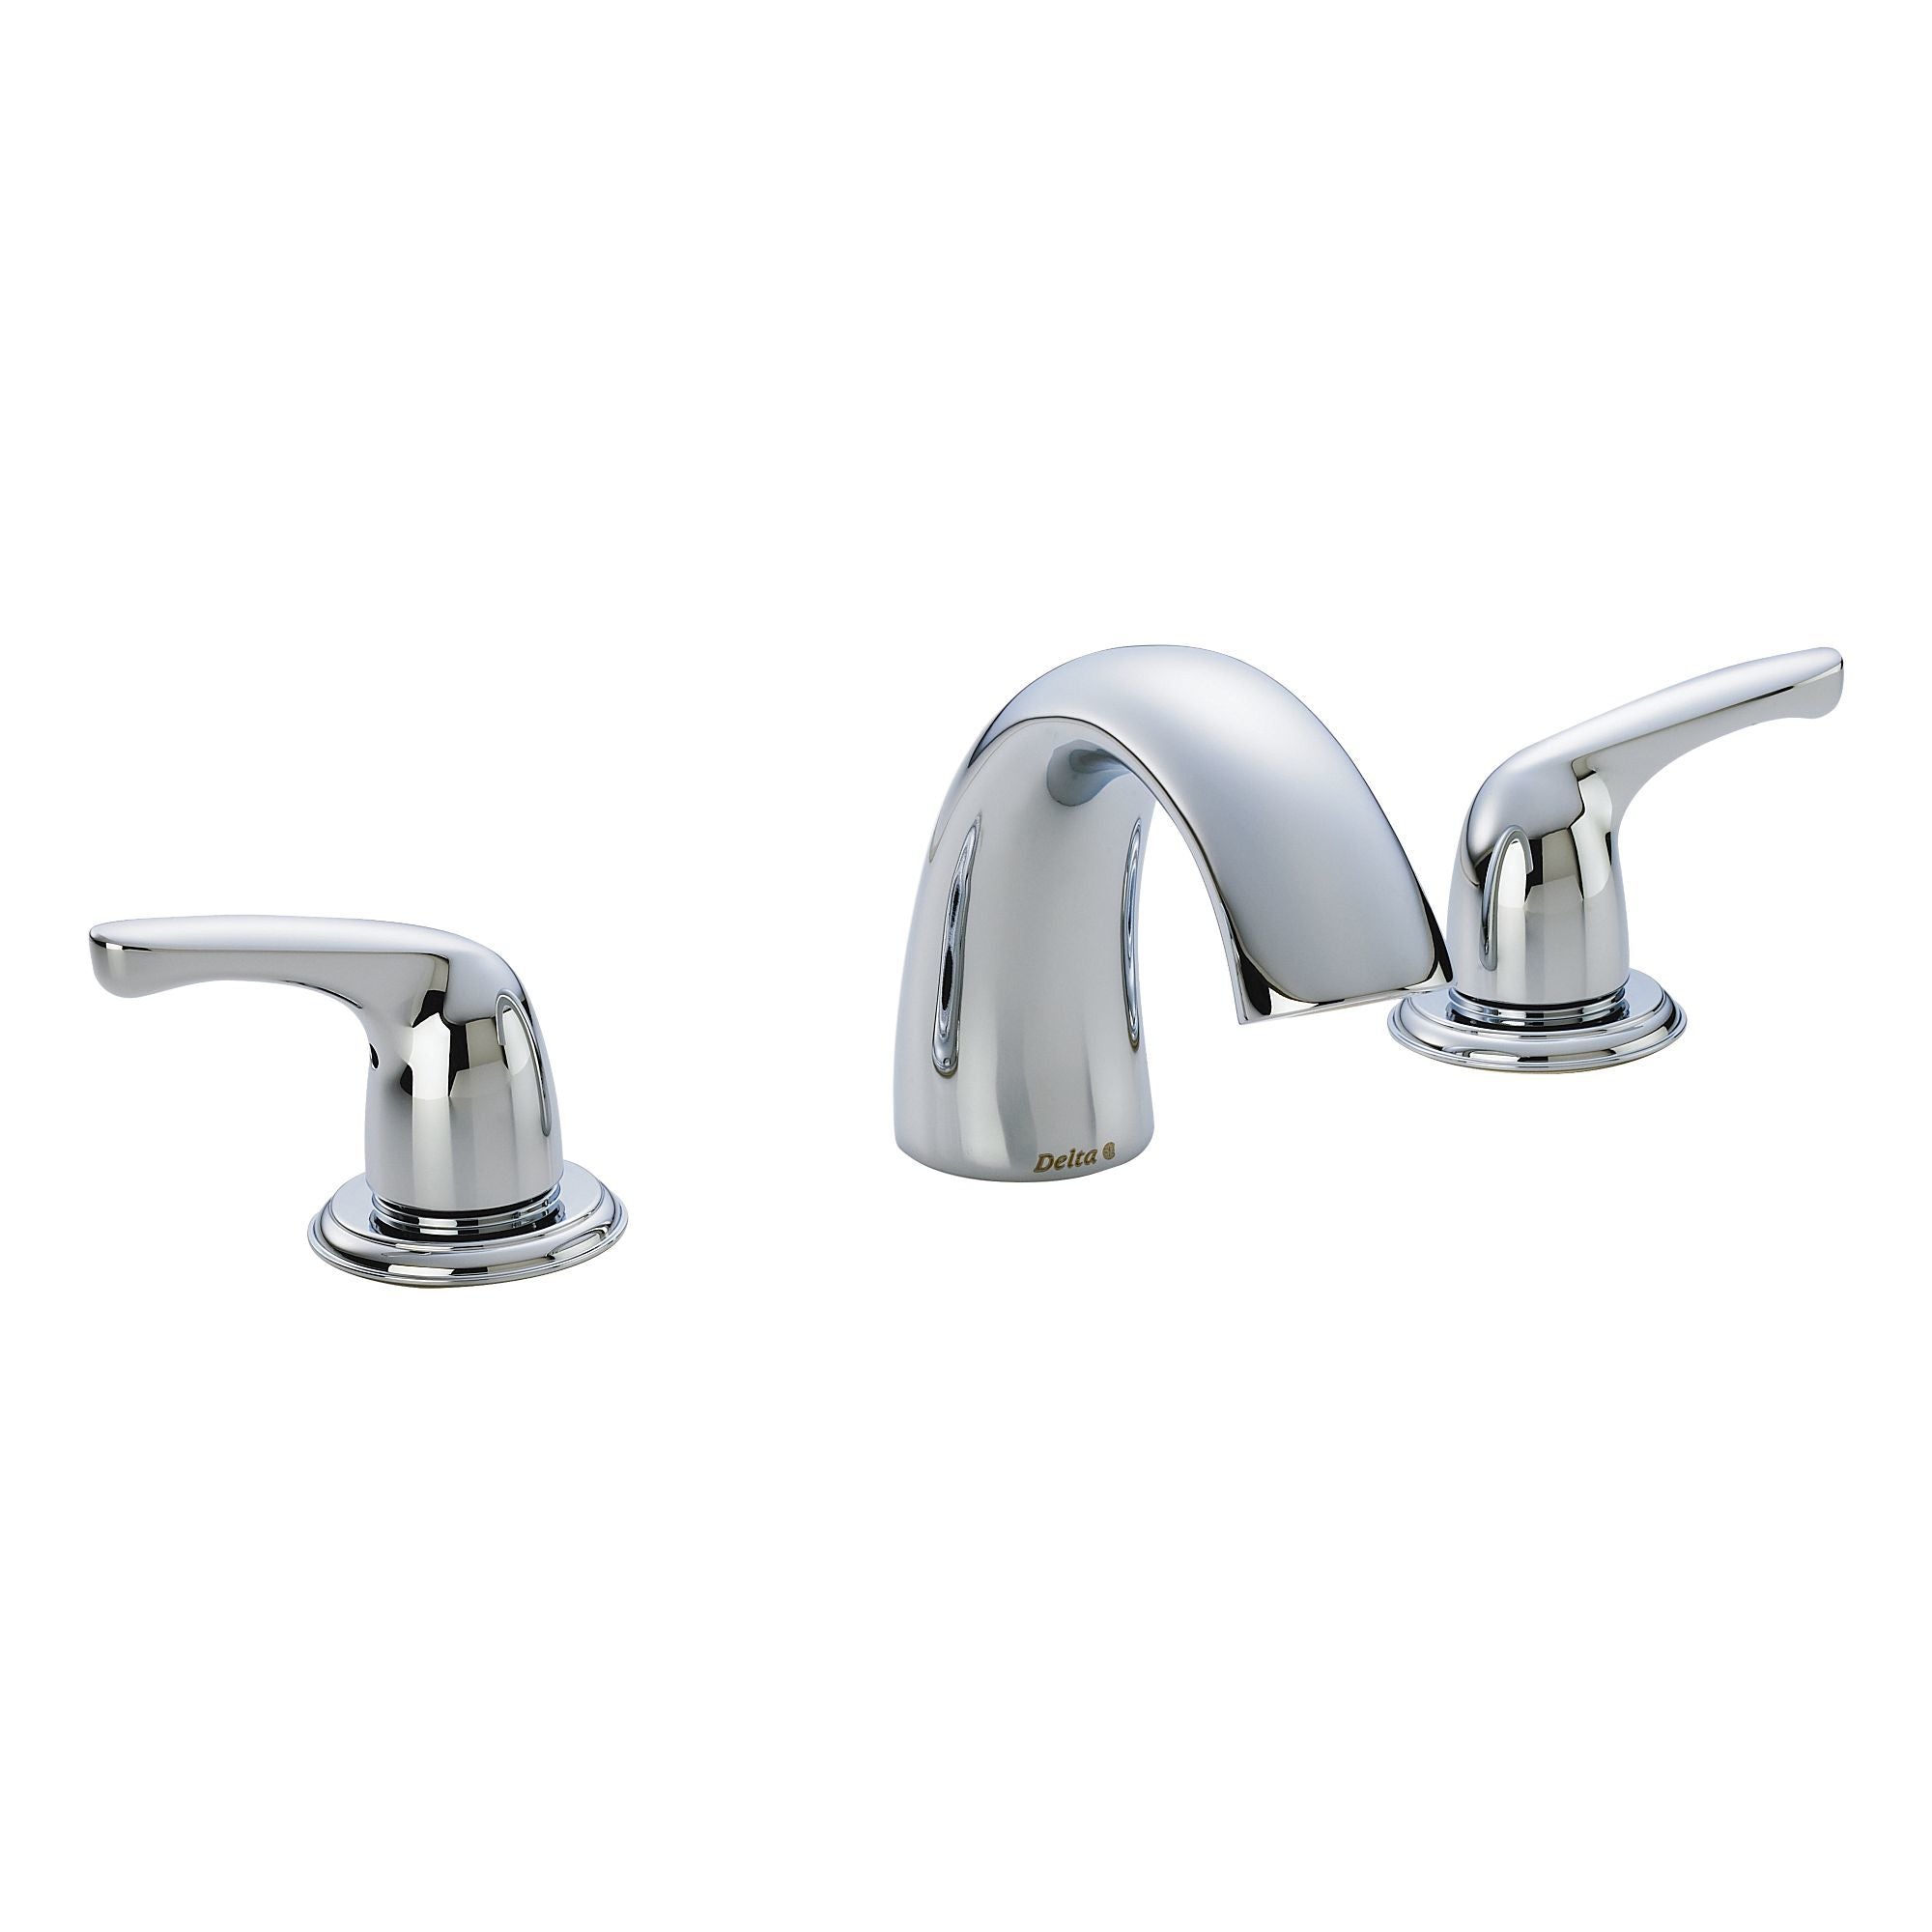 Delta Faucet Classic 2-Handle Widespread Roman Tub Faucet, Brushed Nickel Tub  Faucet, Roman Bathtub Faucet, Delta Roman Tub Faucet, Tub Filler, Stainless  T2705-SS (Valve Not Included) - Tub Filler Faucets 